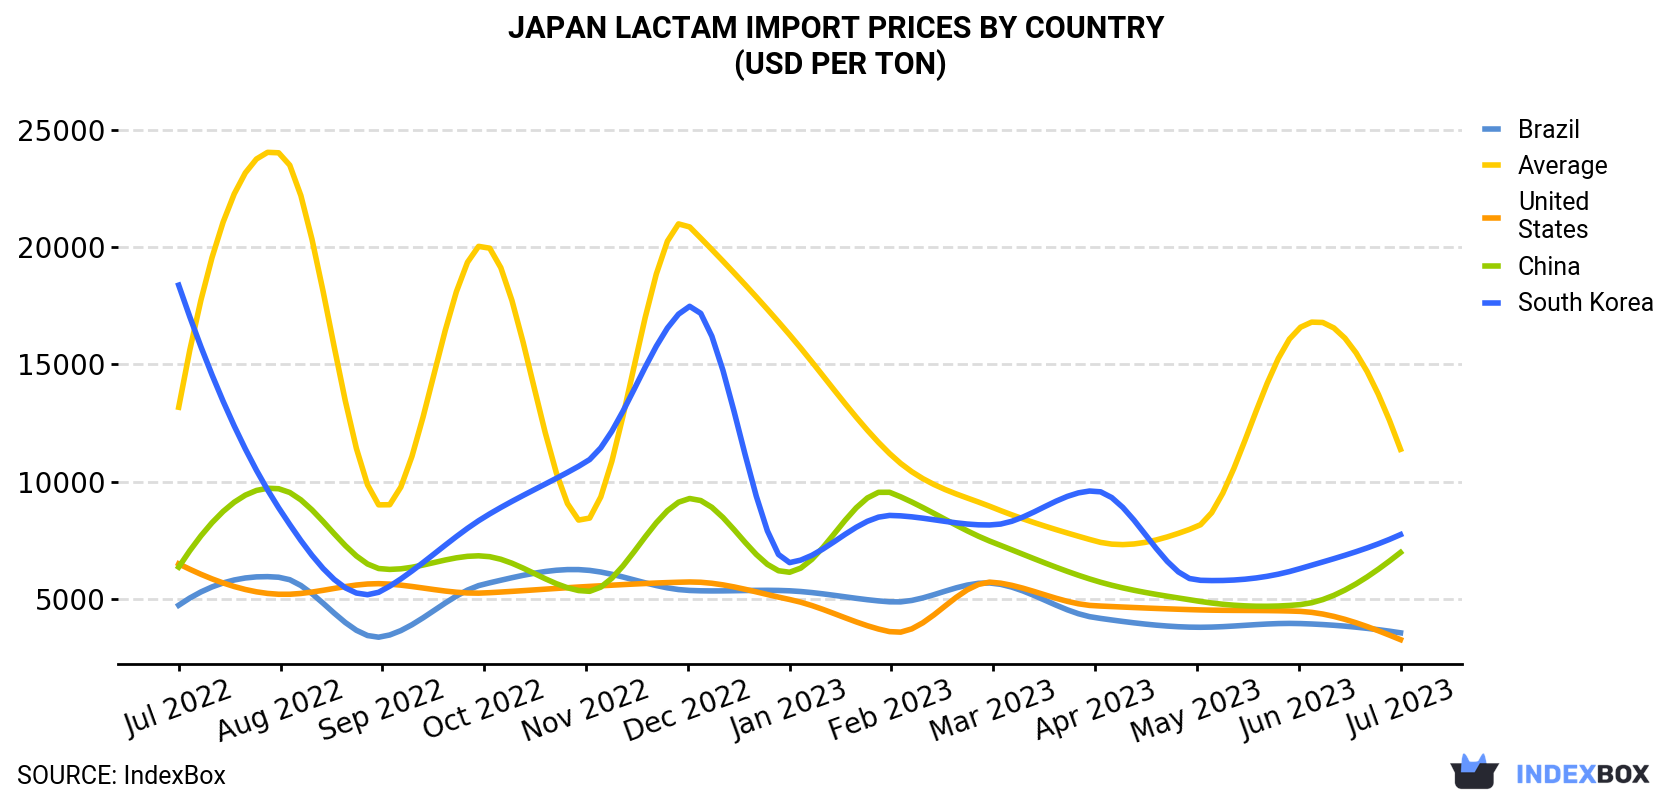 Japan Lactam Import Prices By Country (USD Per Ton)